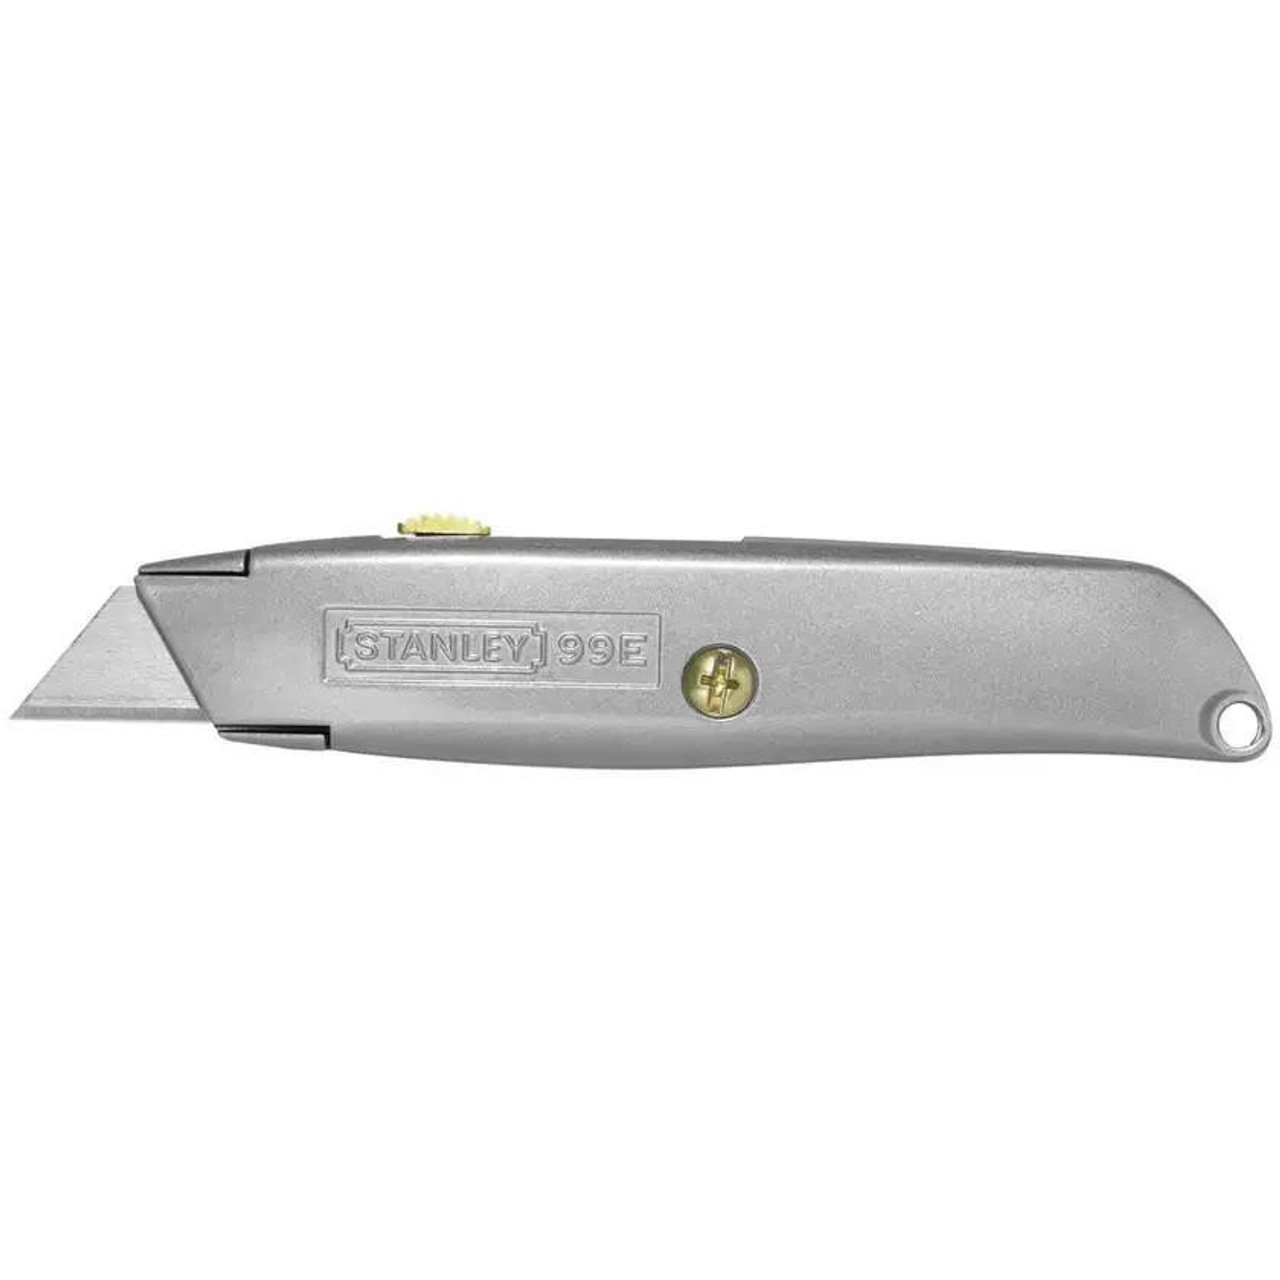 Stanley knife retractable 99 or 10-099